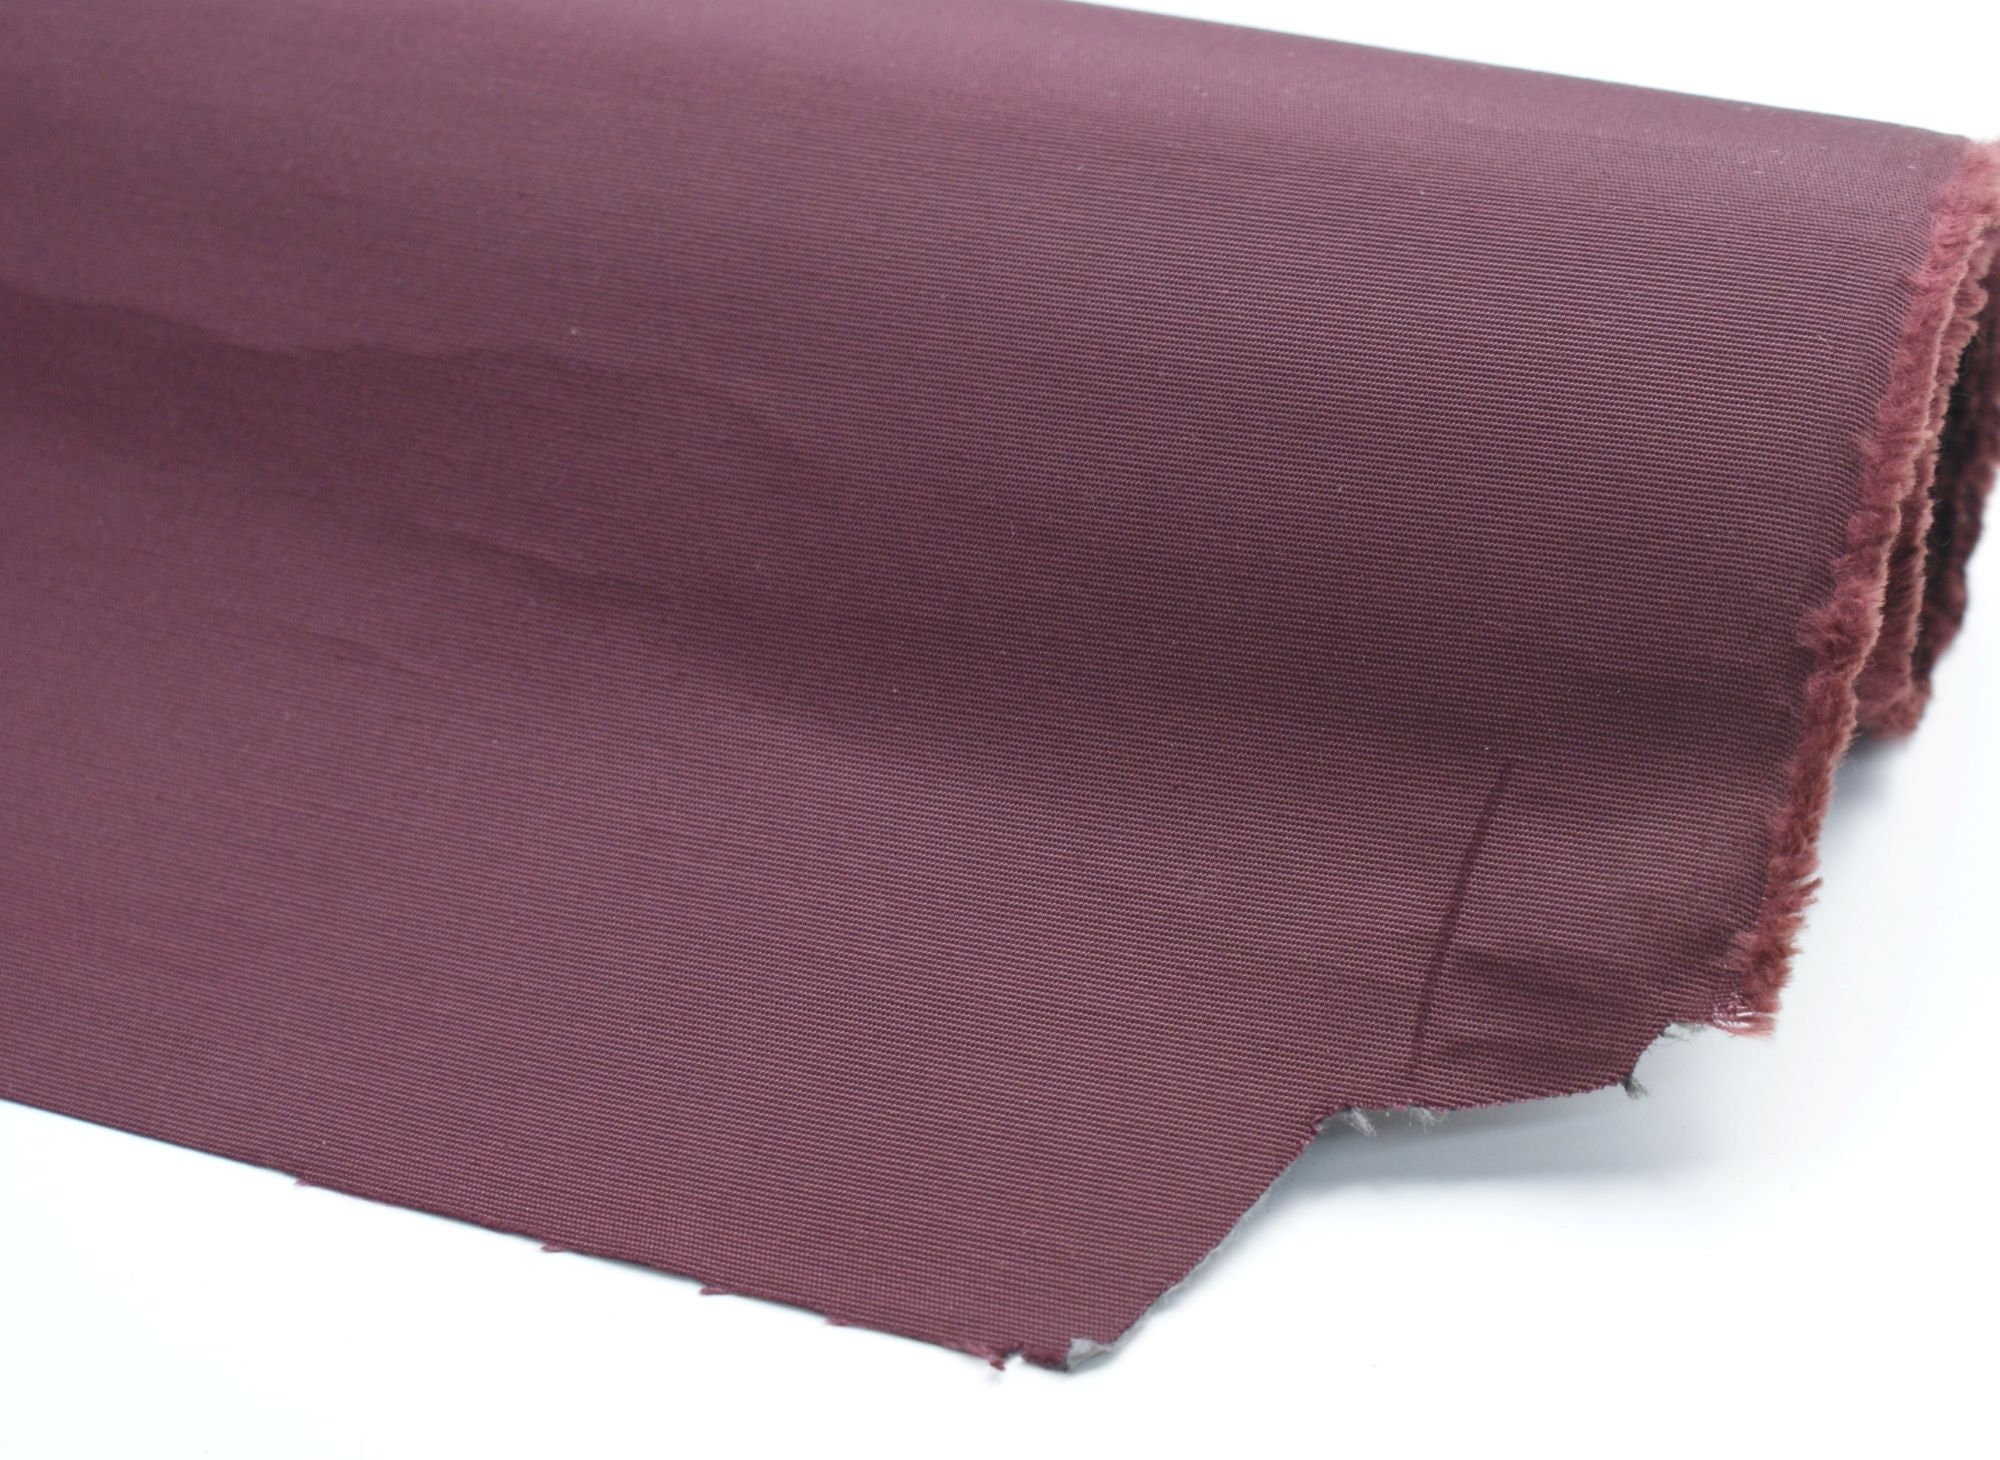 Maroon Book Cloth: 1 Partial Roll of Maroon, Japanese Paper-backed  Bookcloth for Bookbinding 